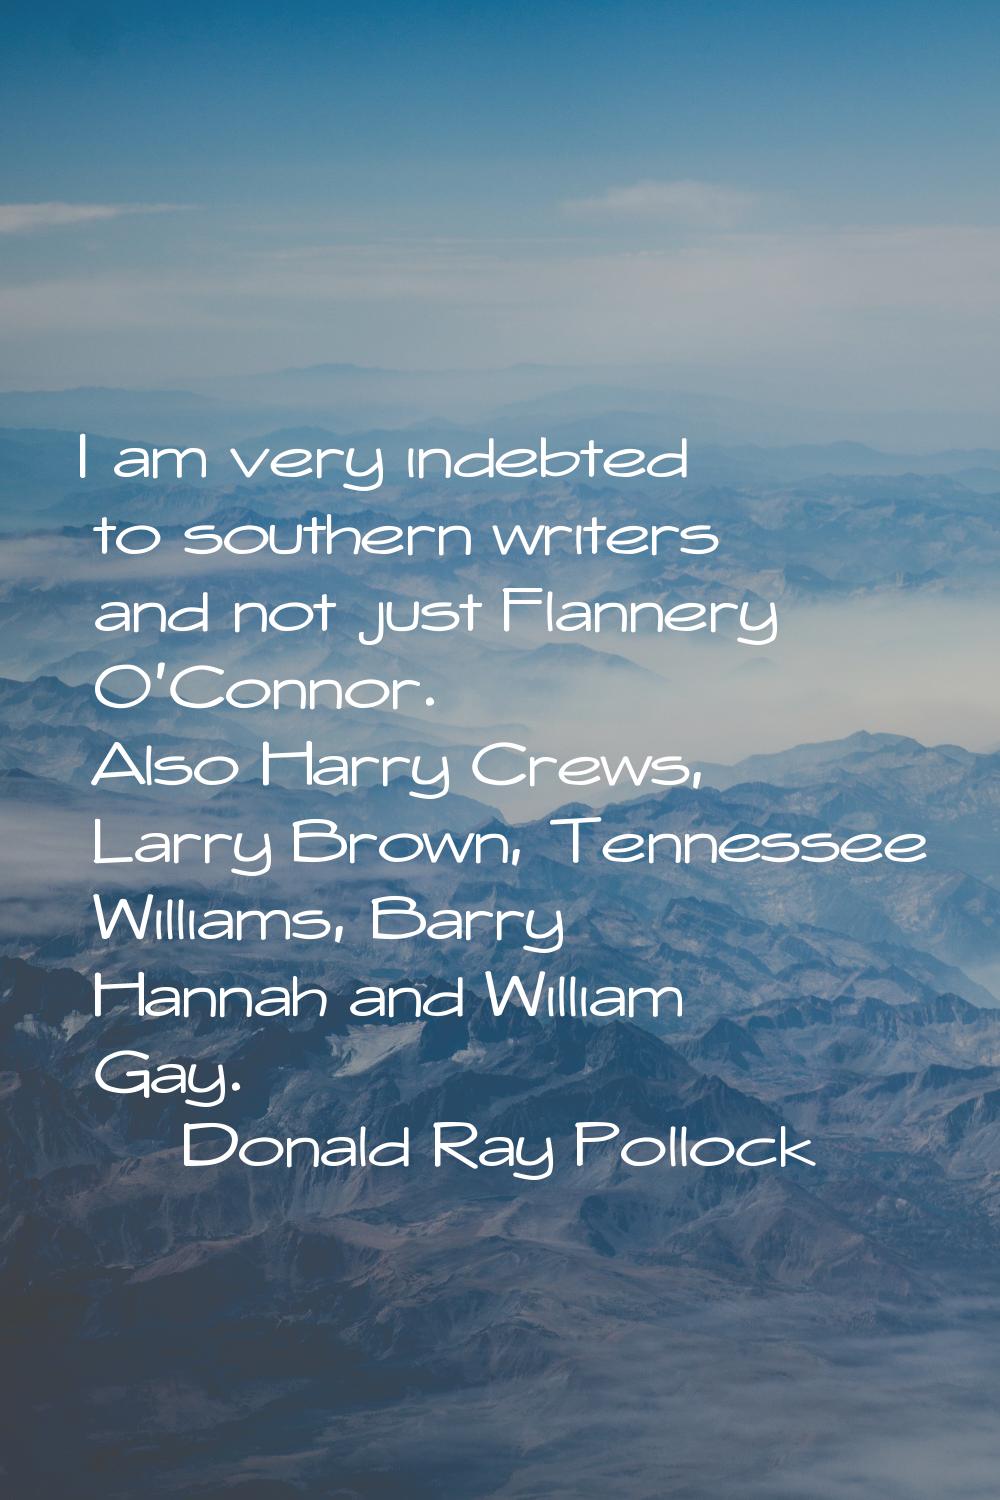 I am very indebted to southern writers and not just Flannery O'Connor. Also Harry Crews, Larry Brow